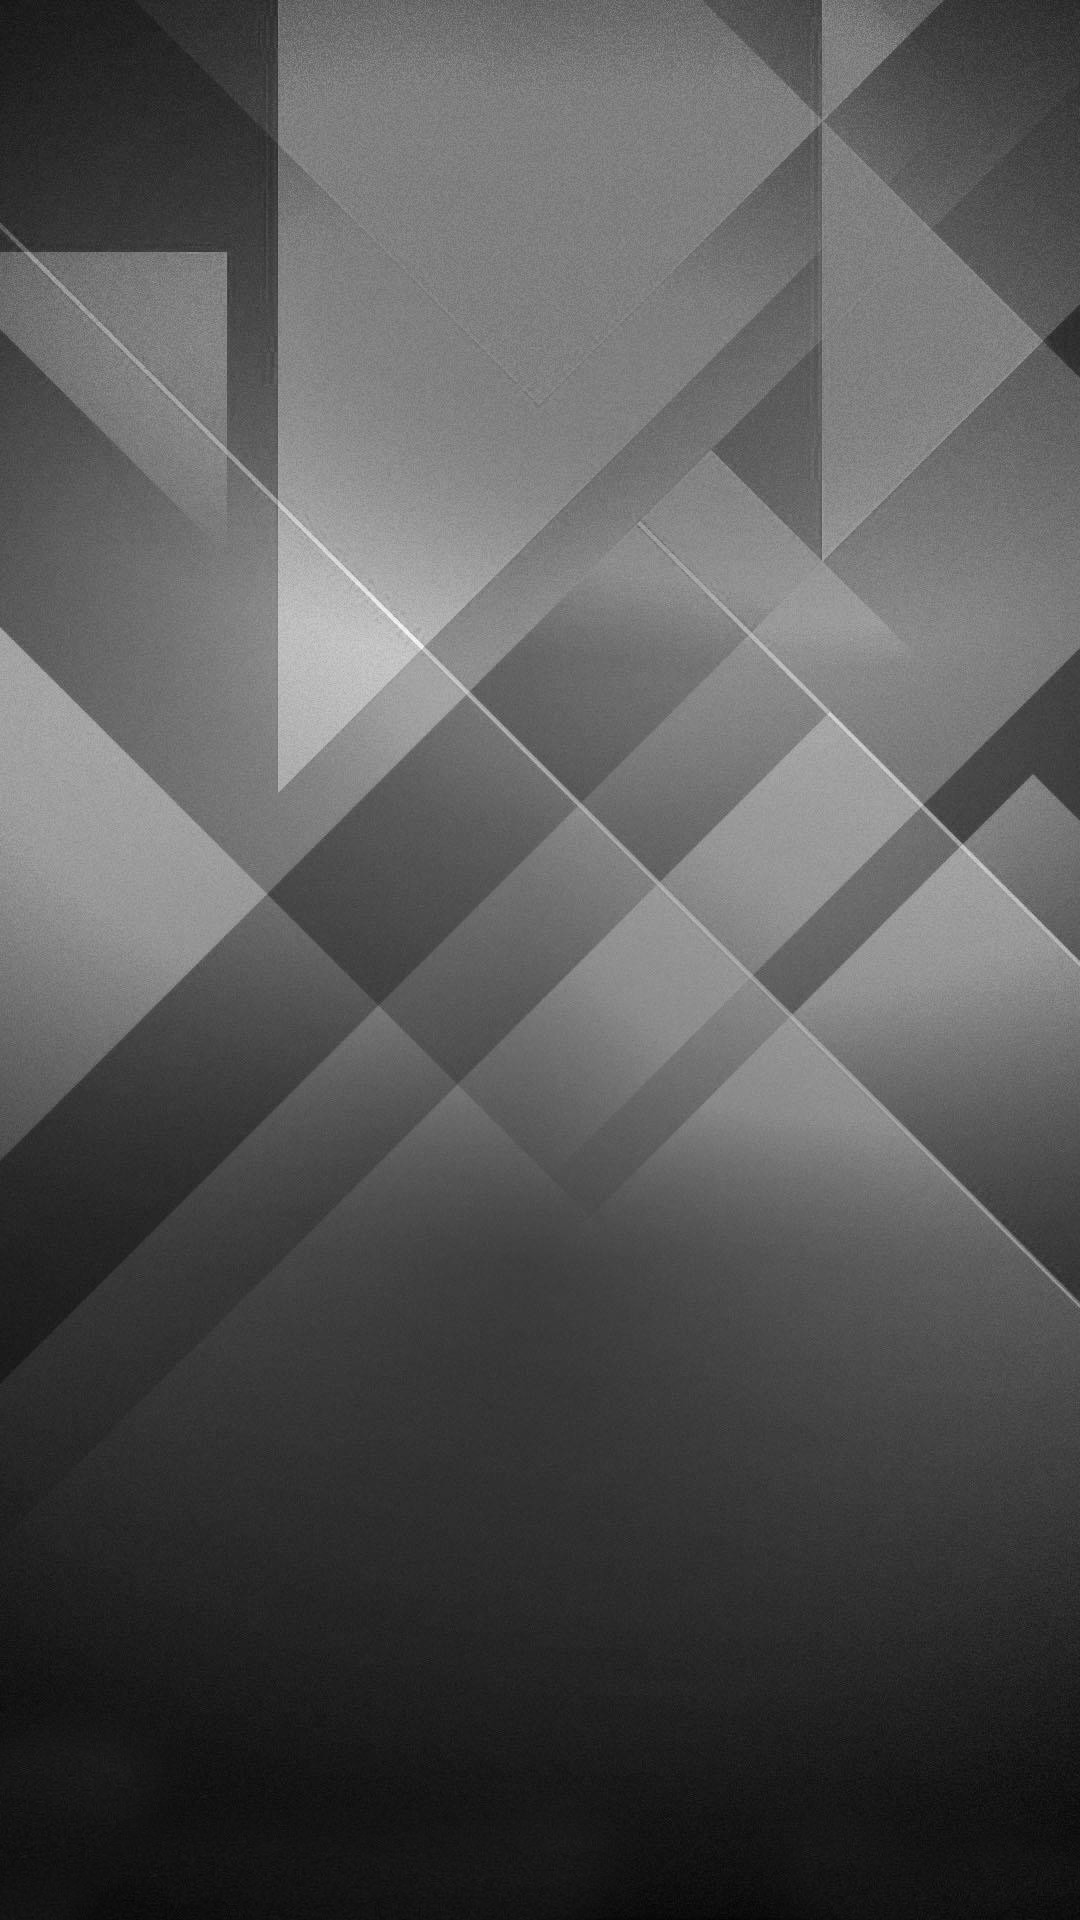 Black And White Abstracts Wallpapers High Quality | Download Free